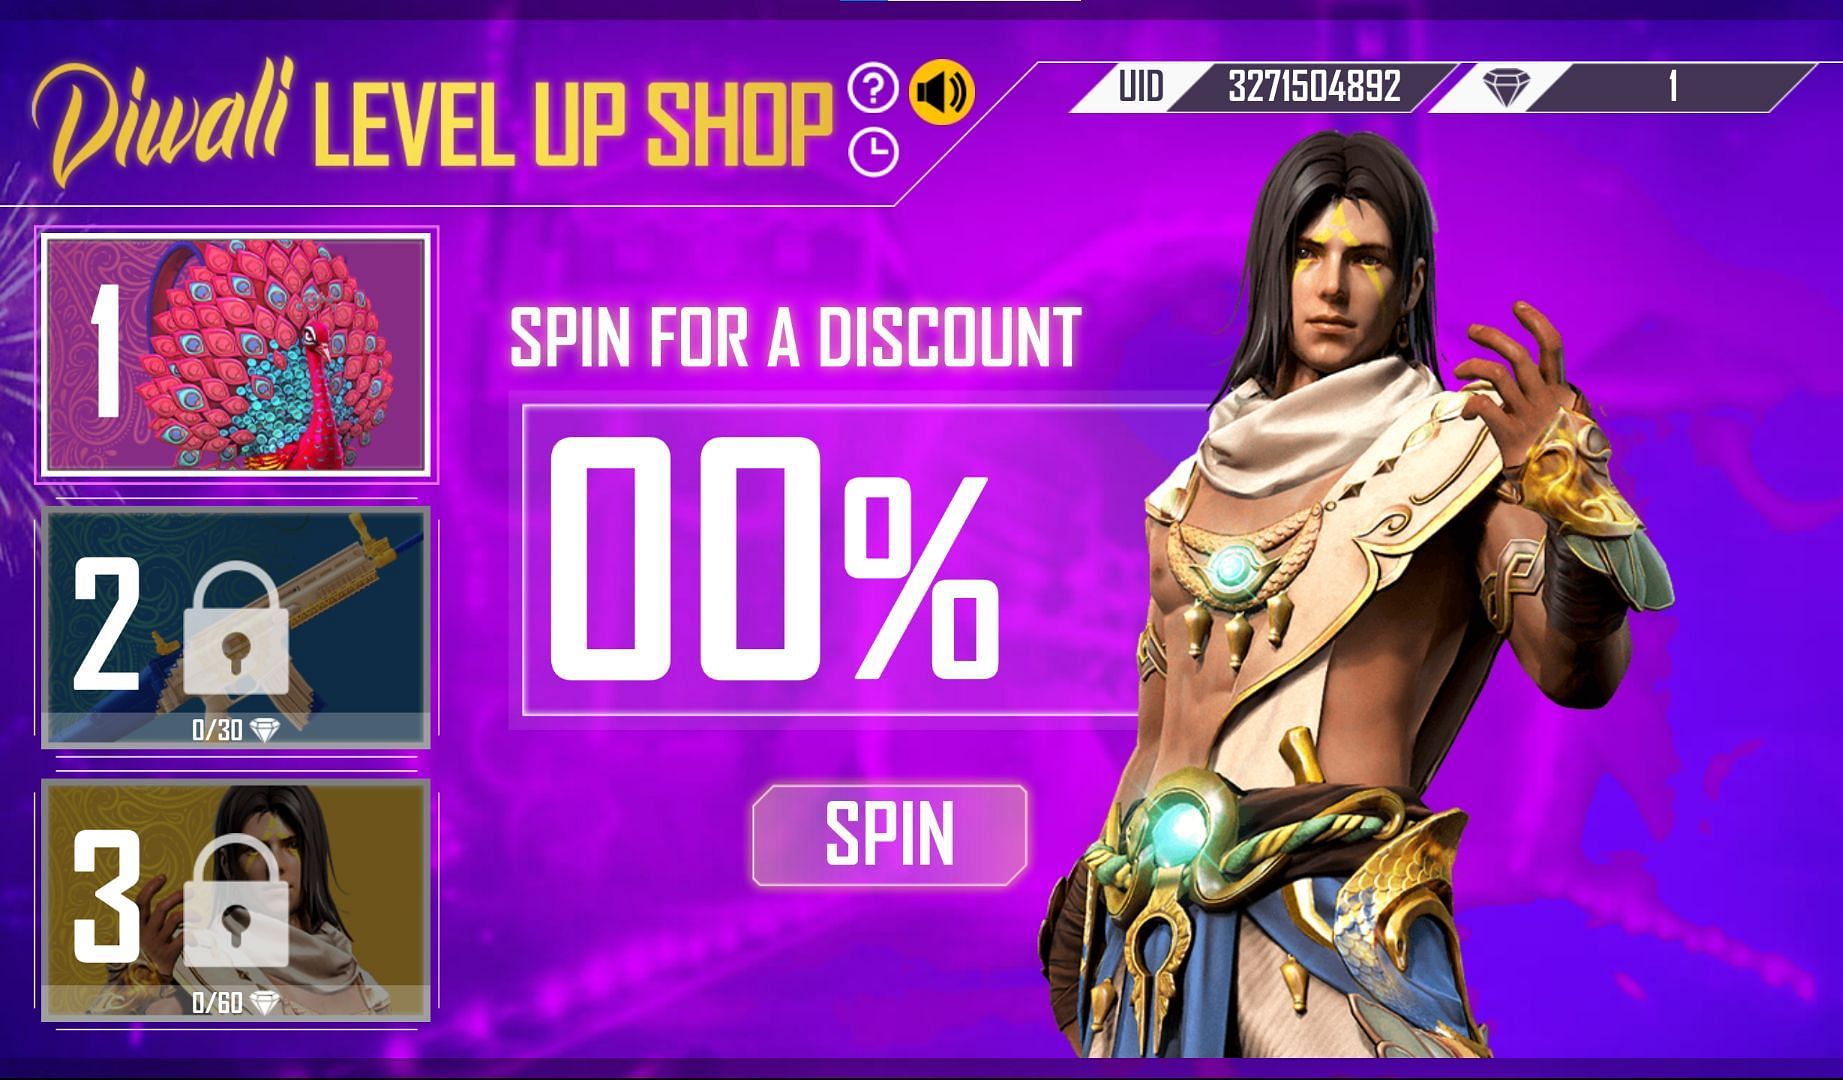 After obtaining the discount, users can purchase a host of items (Image via Free Fire)